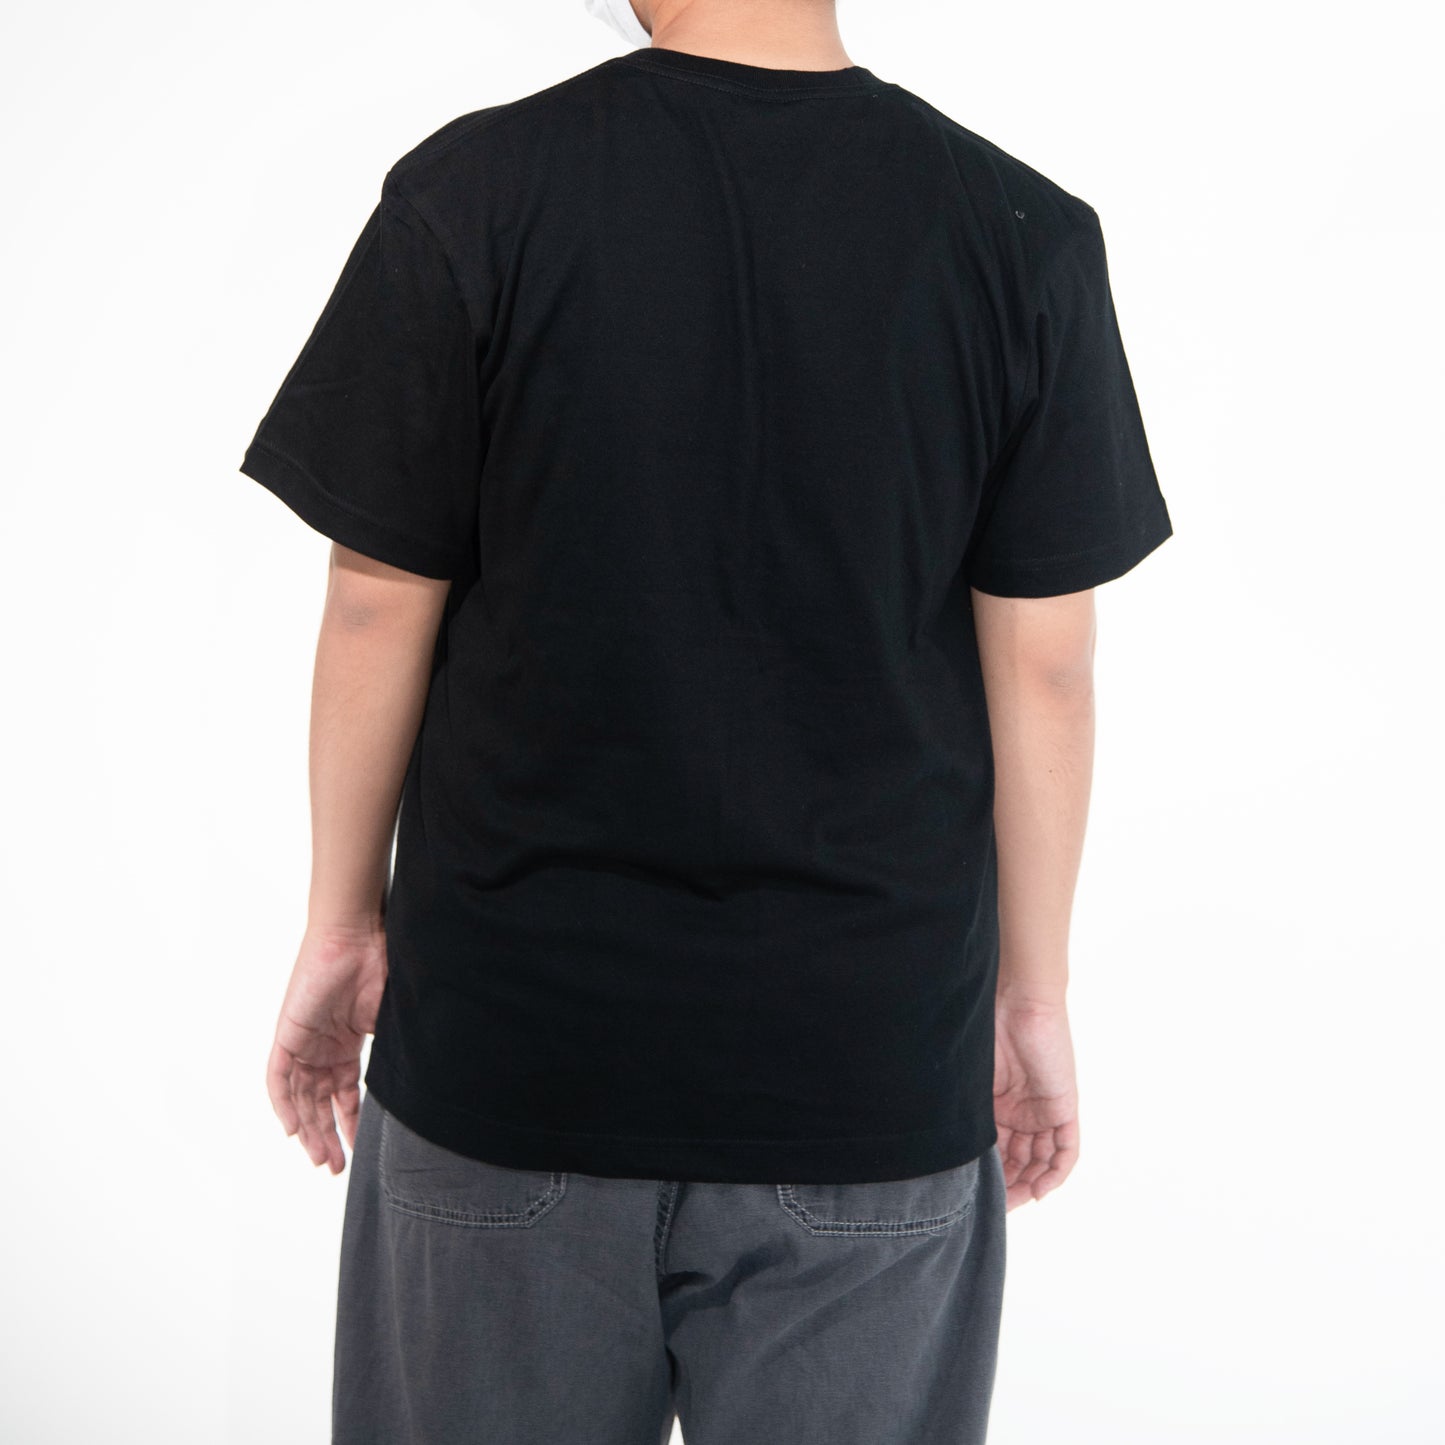 [Troublesome Saurus] Short sleeve embroidered T-shirt